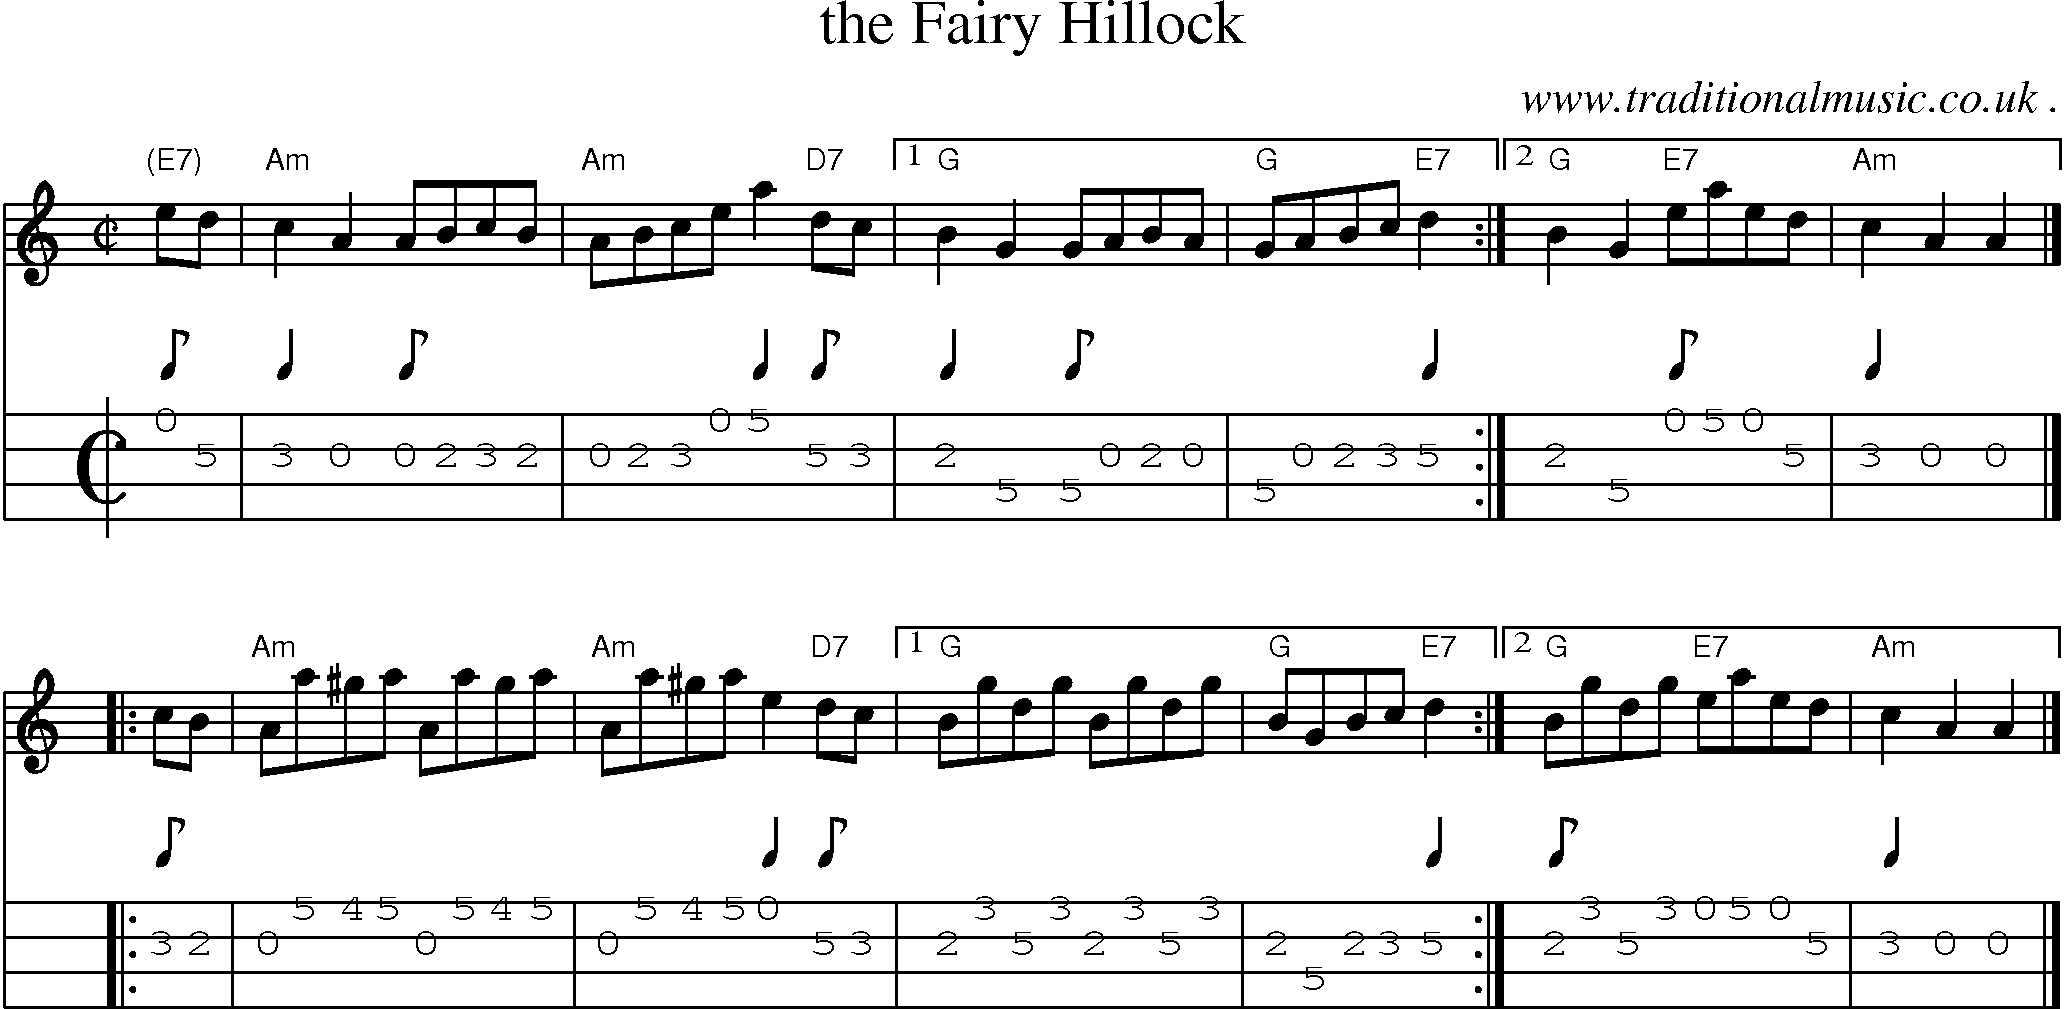 Sheet-music  score, Chords and Mandolin Tabs for The Fairy Hillock